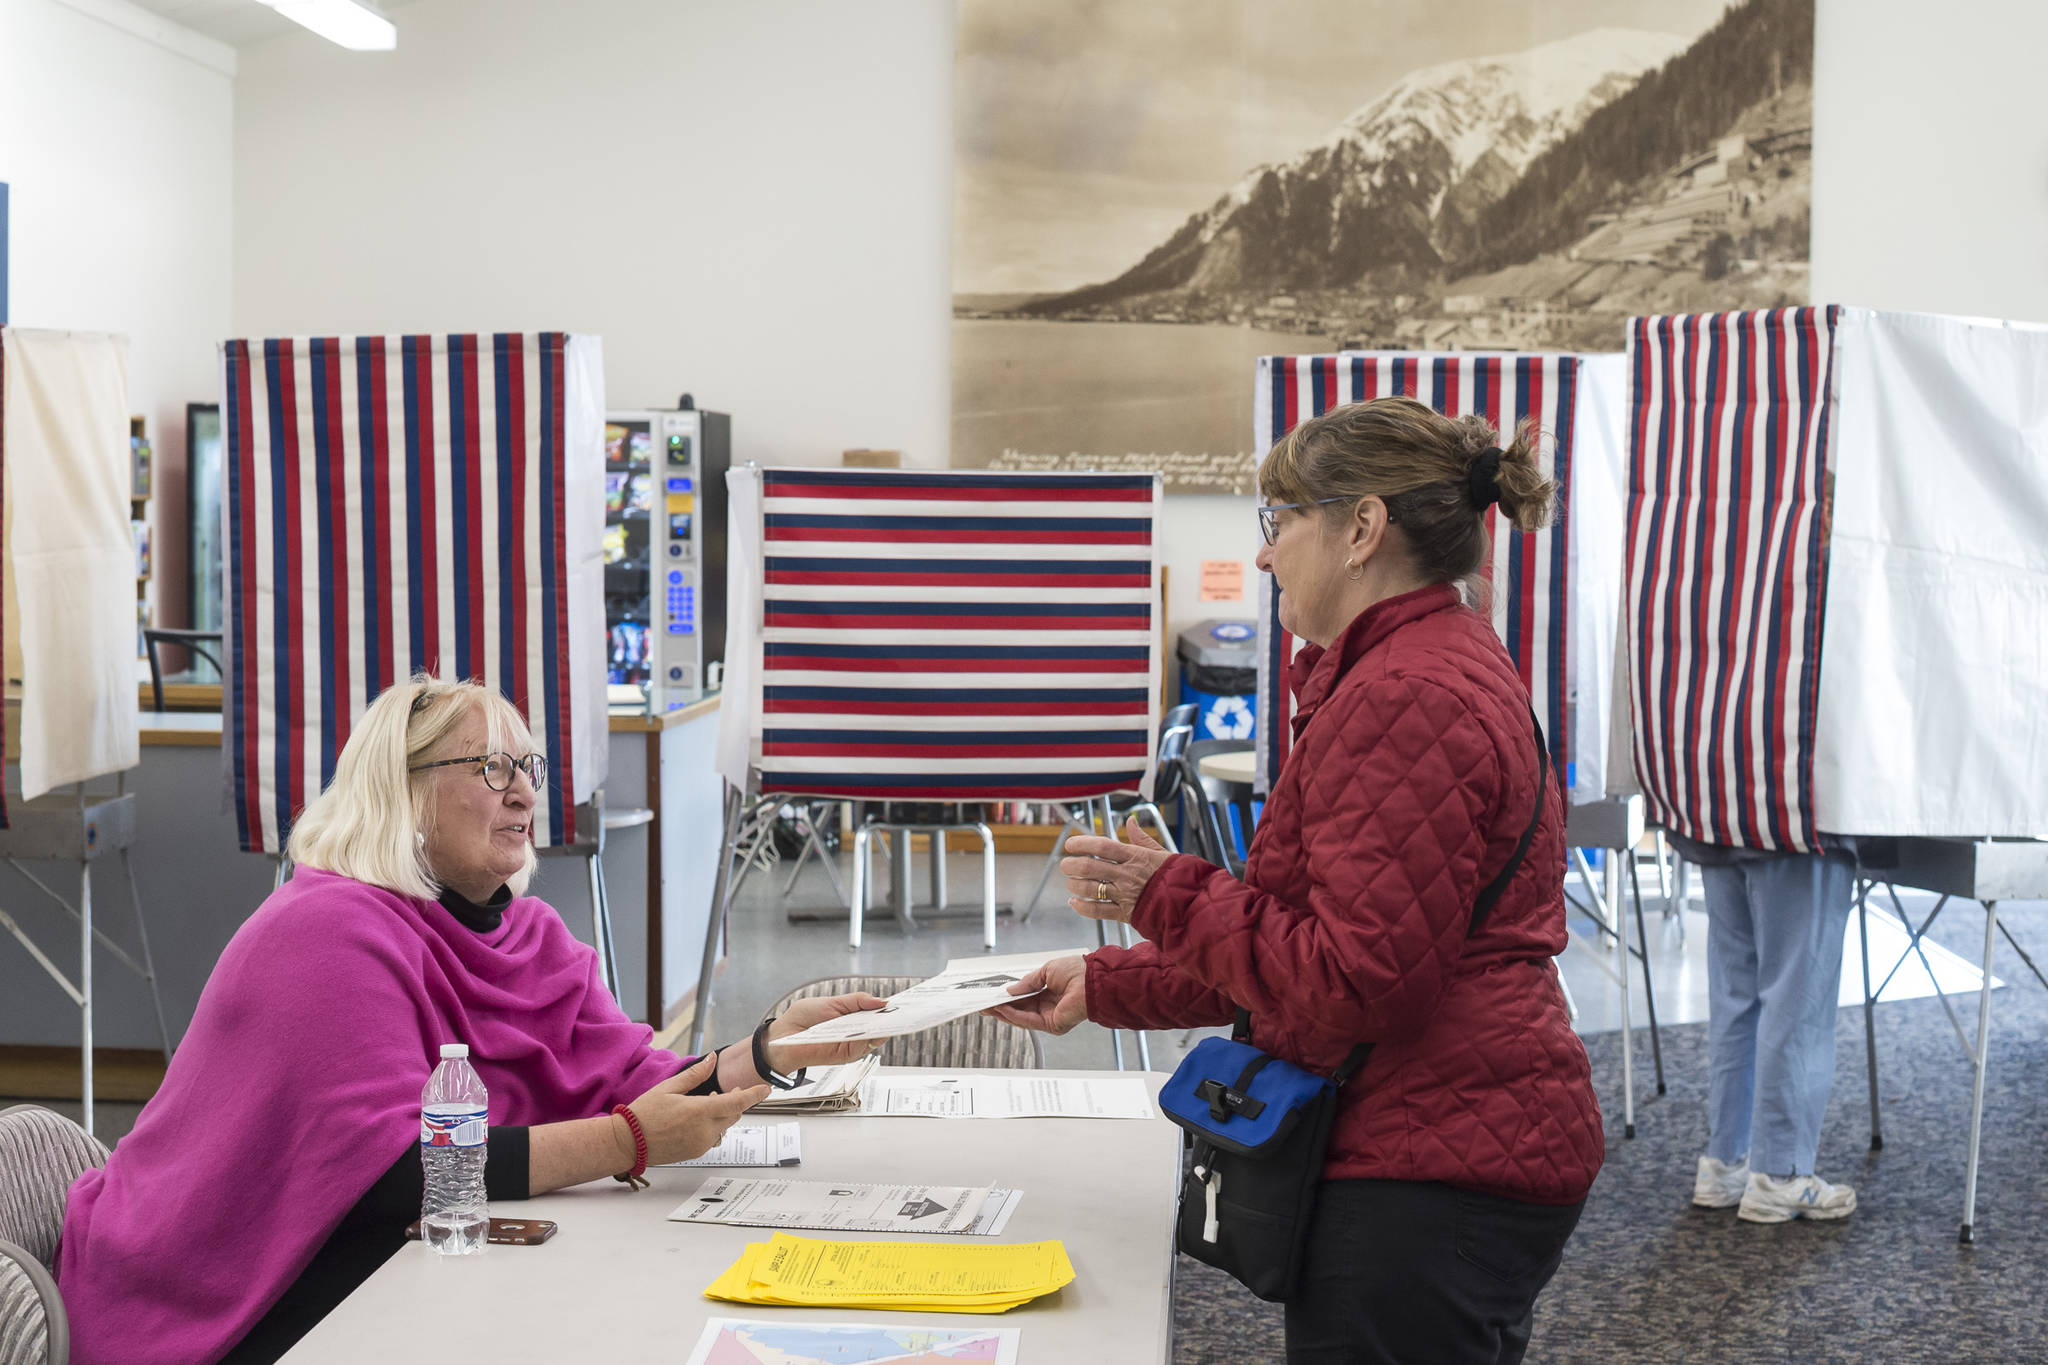 Election official Jacqueline Fowler, left, hands Becky Dierking her ballot in the Municipal Election at the Auke Bay Ferry Terminal on Tuesday, Oct. 2, 2018. (Michael Penn | Juneau Empire)